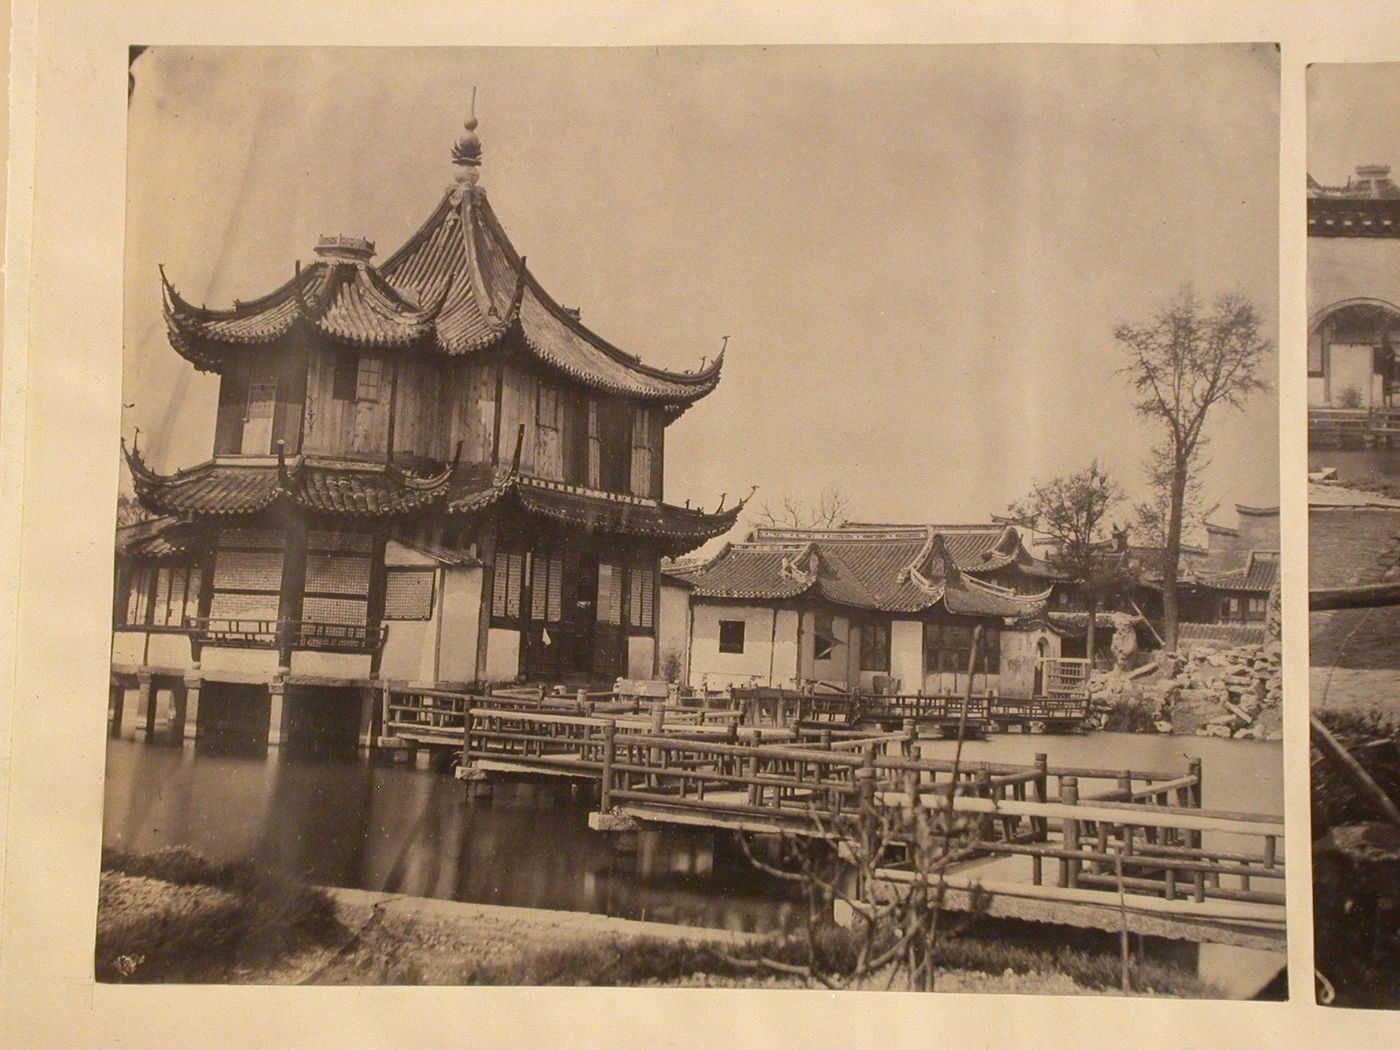 View of the Huxin Ting [Heart-of-the-Garden Pavillion] and zigzag bridge in Yu Yuan [The Garden to Please], Shanghai, China